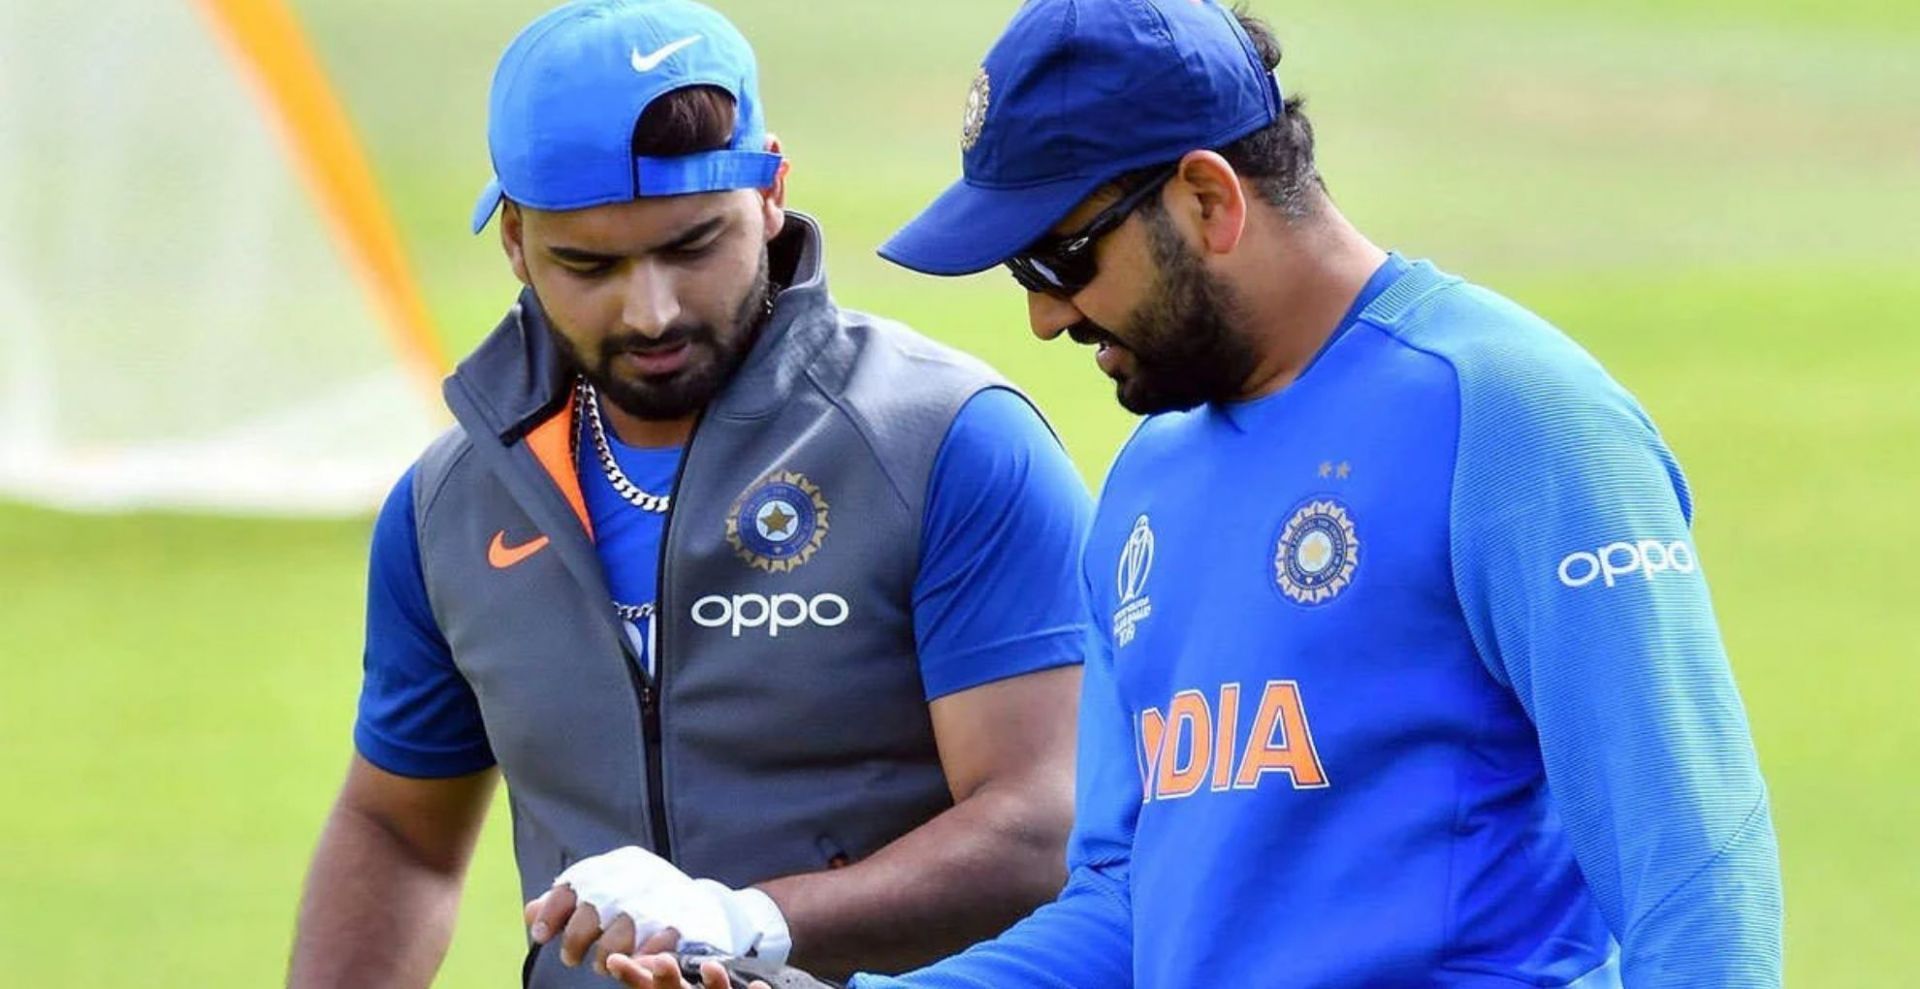 (L-R): Rishabh Pant and Rohit Sharma share a great rapport off the field. (Credits: Twitter)